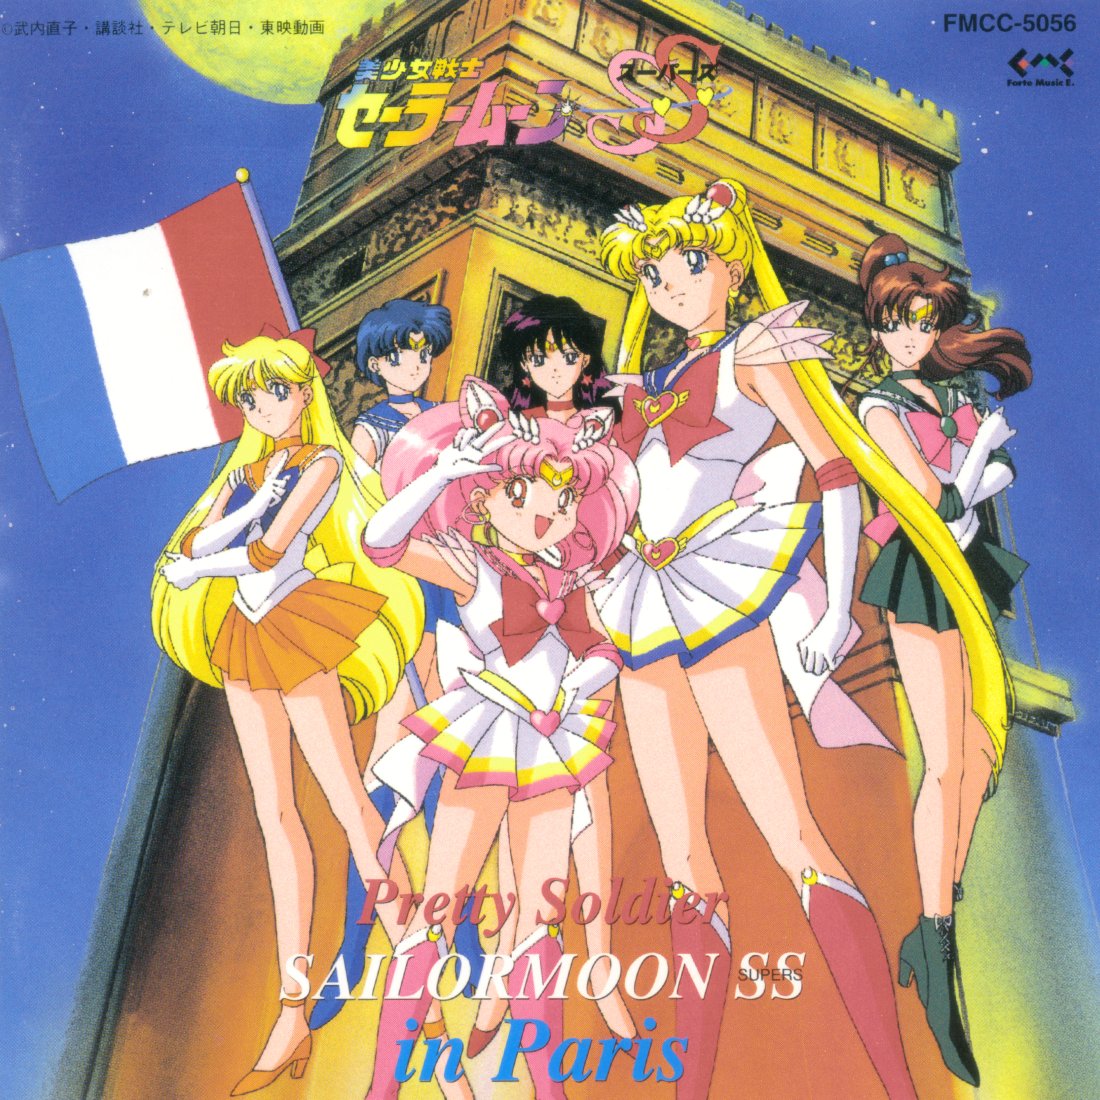 Sailor Moon SuperS #5